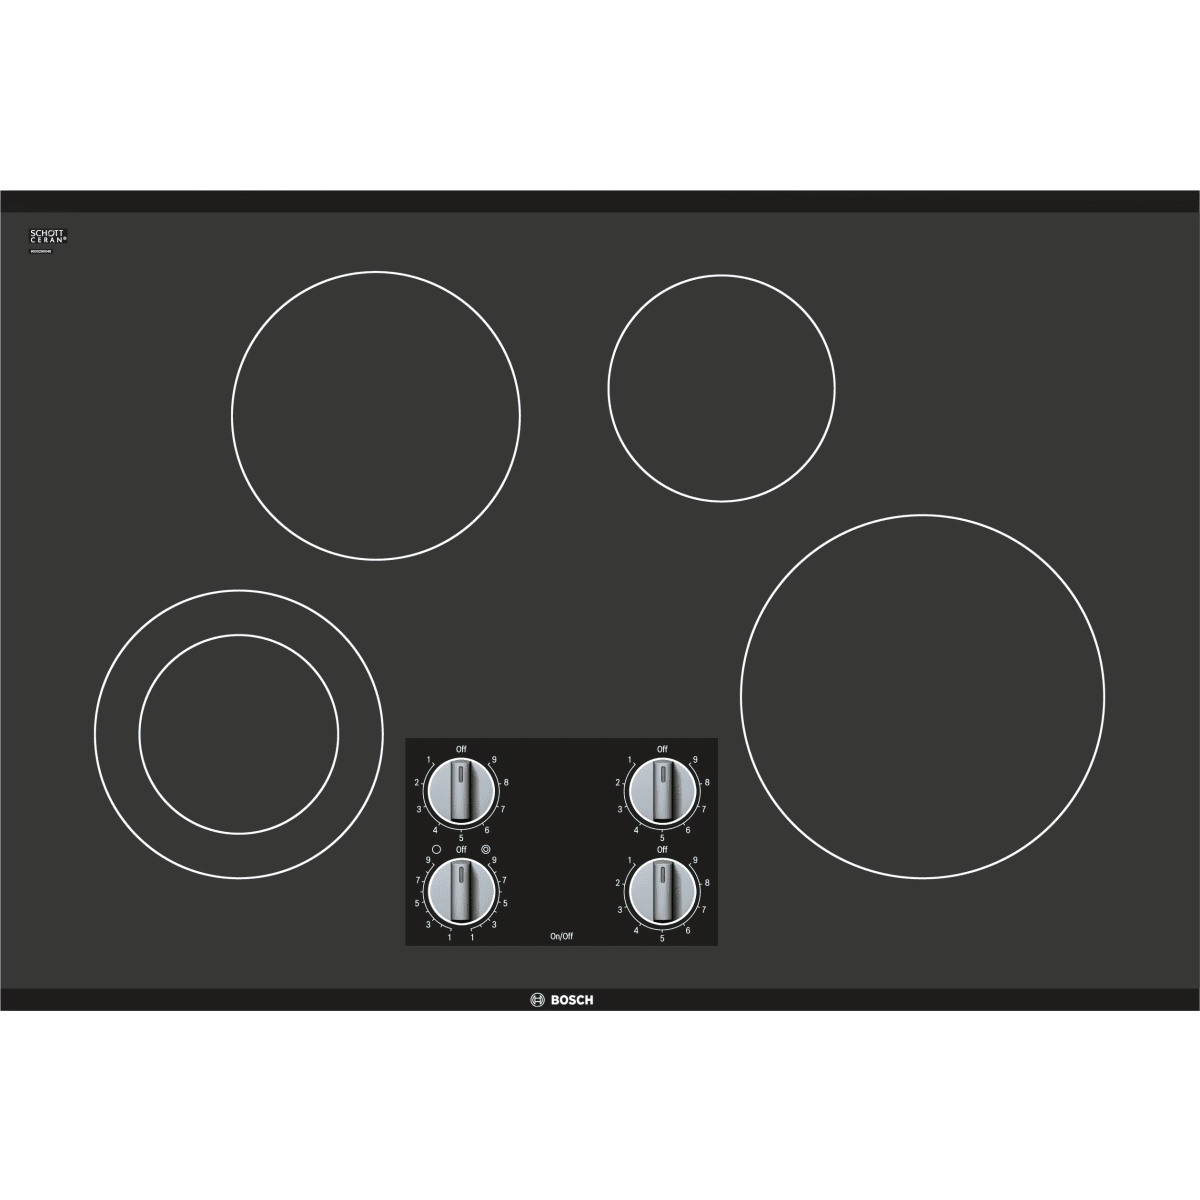 Whirlpool WCC31430AB 30 Electric Cooktop - Black